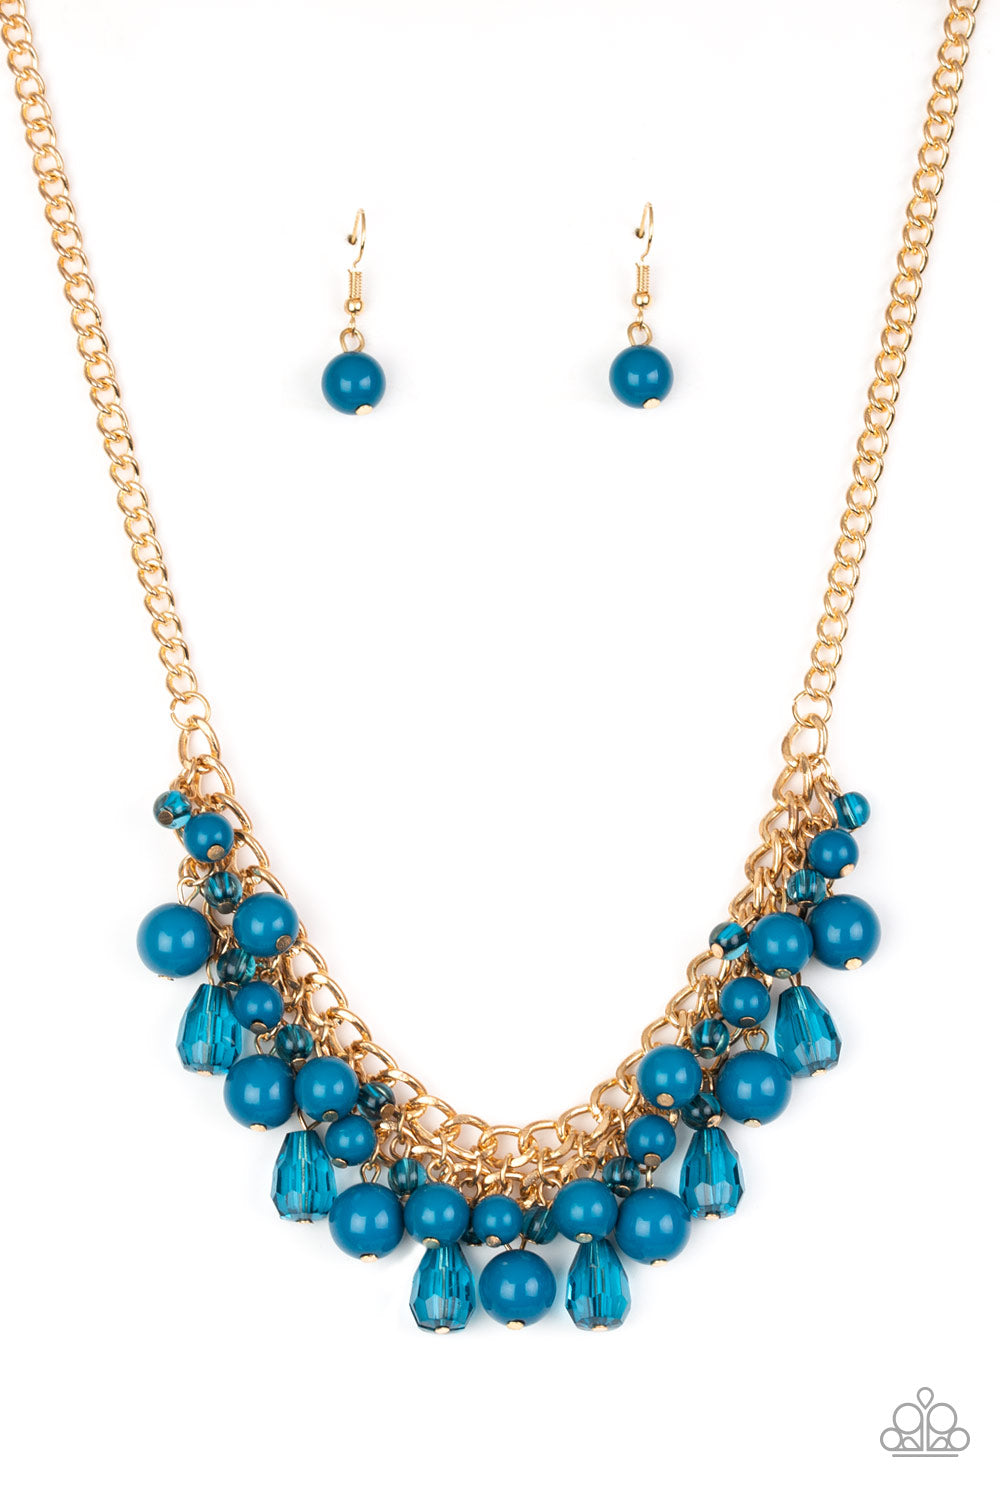 Varying in shape, glassy and polished blue beads swing from the bottom of interlocking gold chains. Crystal-like teardrops are sprinkled along the colorful beading, creating a flirtatious fringe below the collar. Features an adjustable clasp closure.